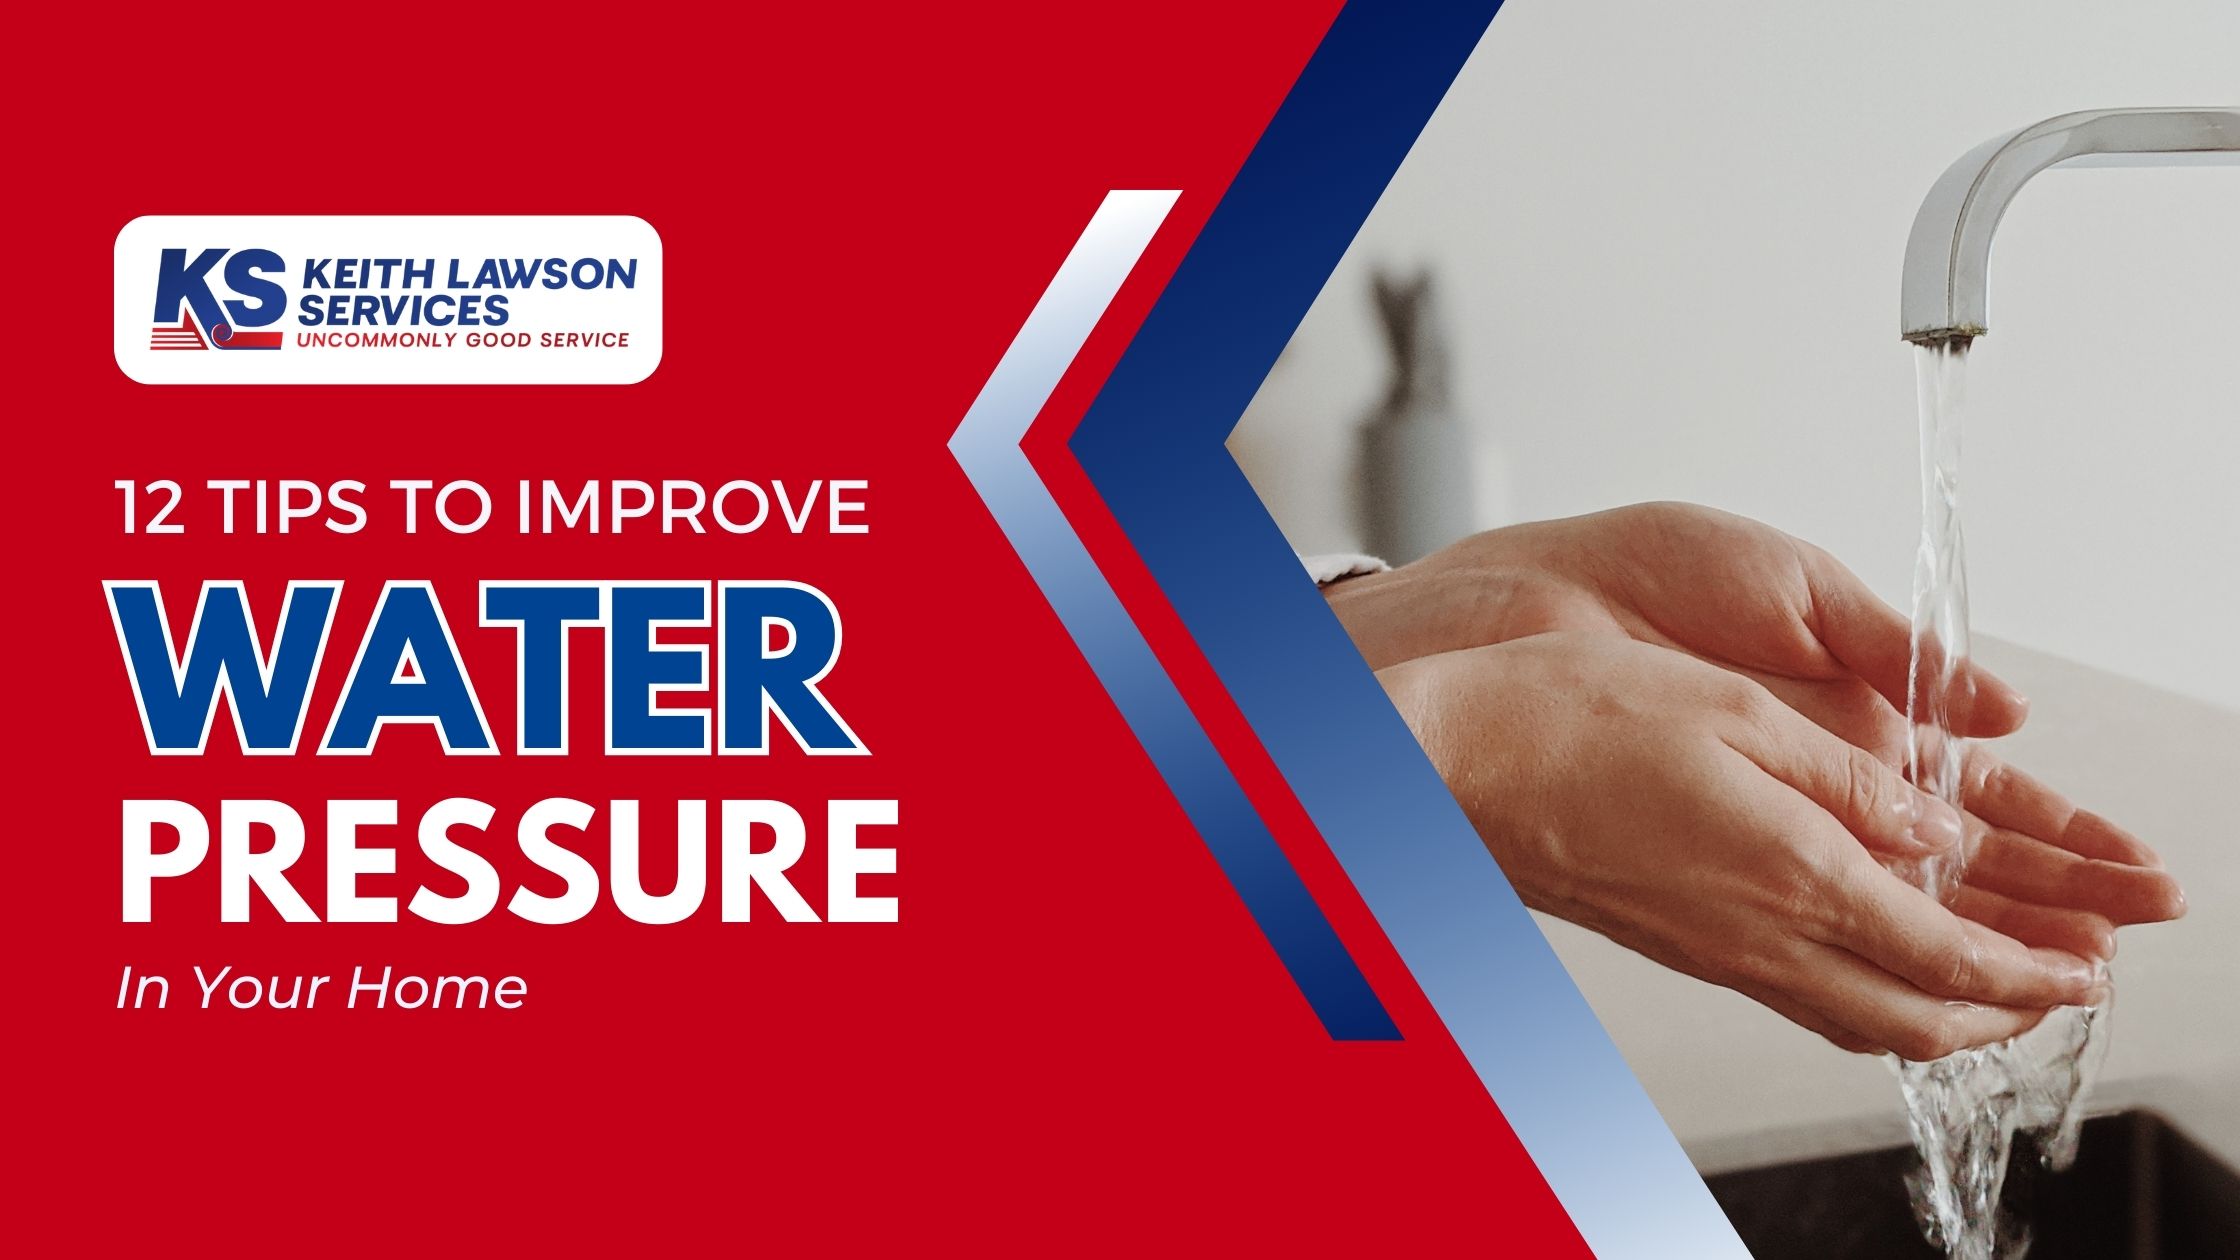 12 Tips to Improve Water Pressure In Your Home